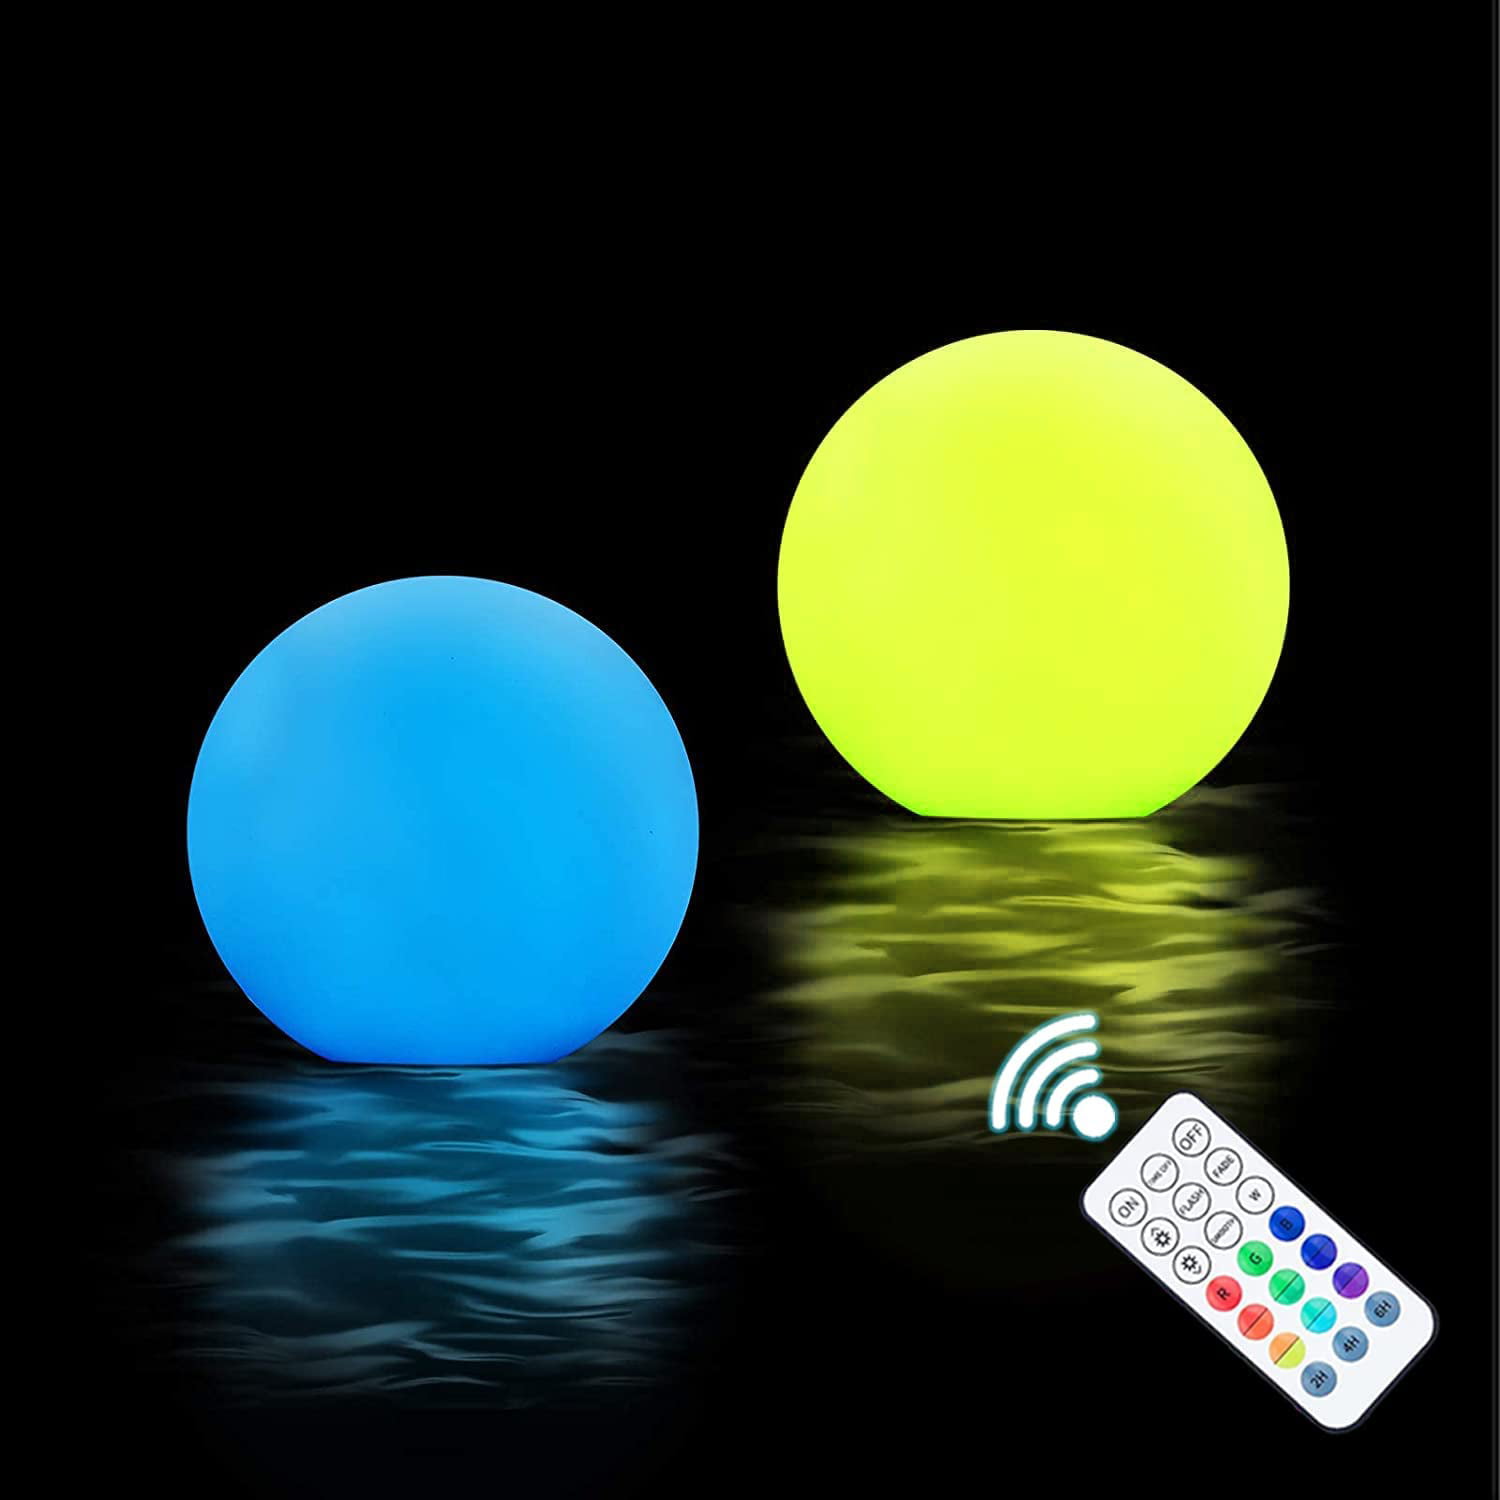 IP68 Waterproof Inflatable Solar Lights for Swimming Pool 19 inch 2 Pack Outdoor LED Glow Lights with 16 Colors Changing Night Lights Yeetou Solar Floating Pool Lights with Remote Lawn 